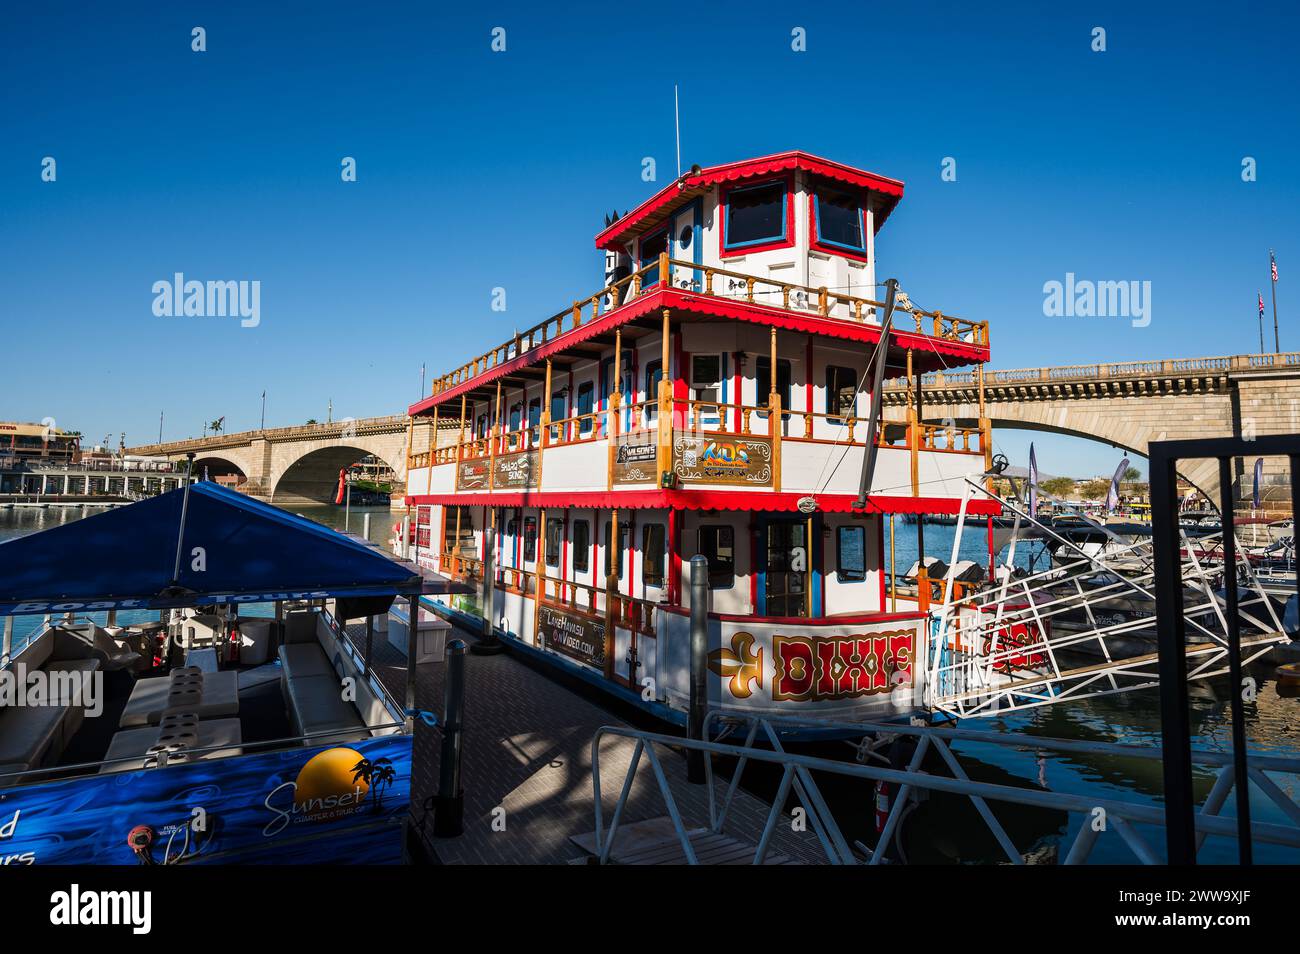 Tour boats near the old London Bridge, which was relocated from London England in the 1970’s to Lake Havasu Arizona. Stock Photo